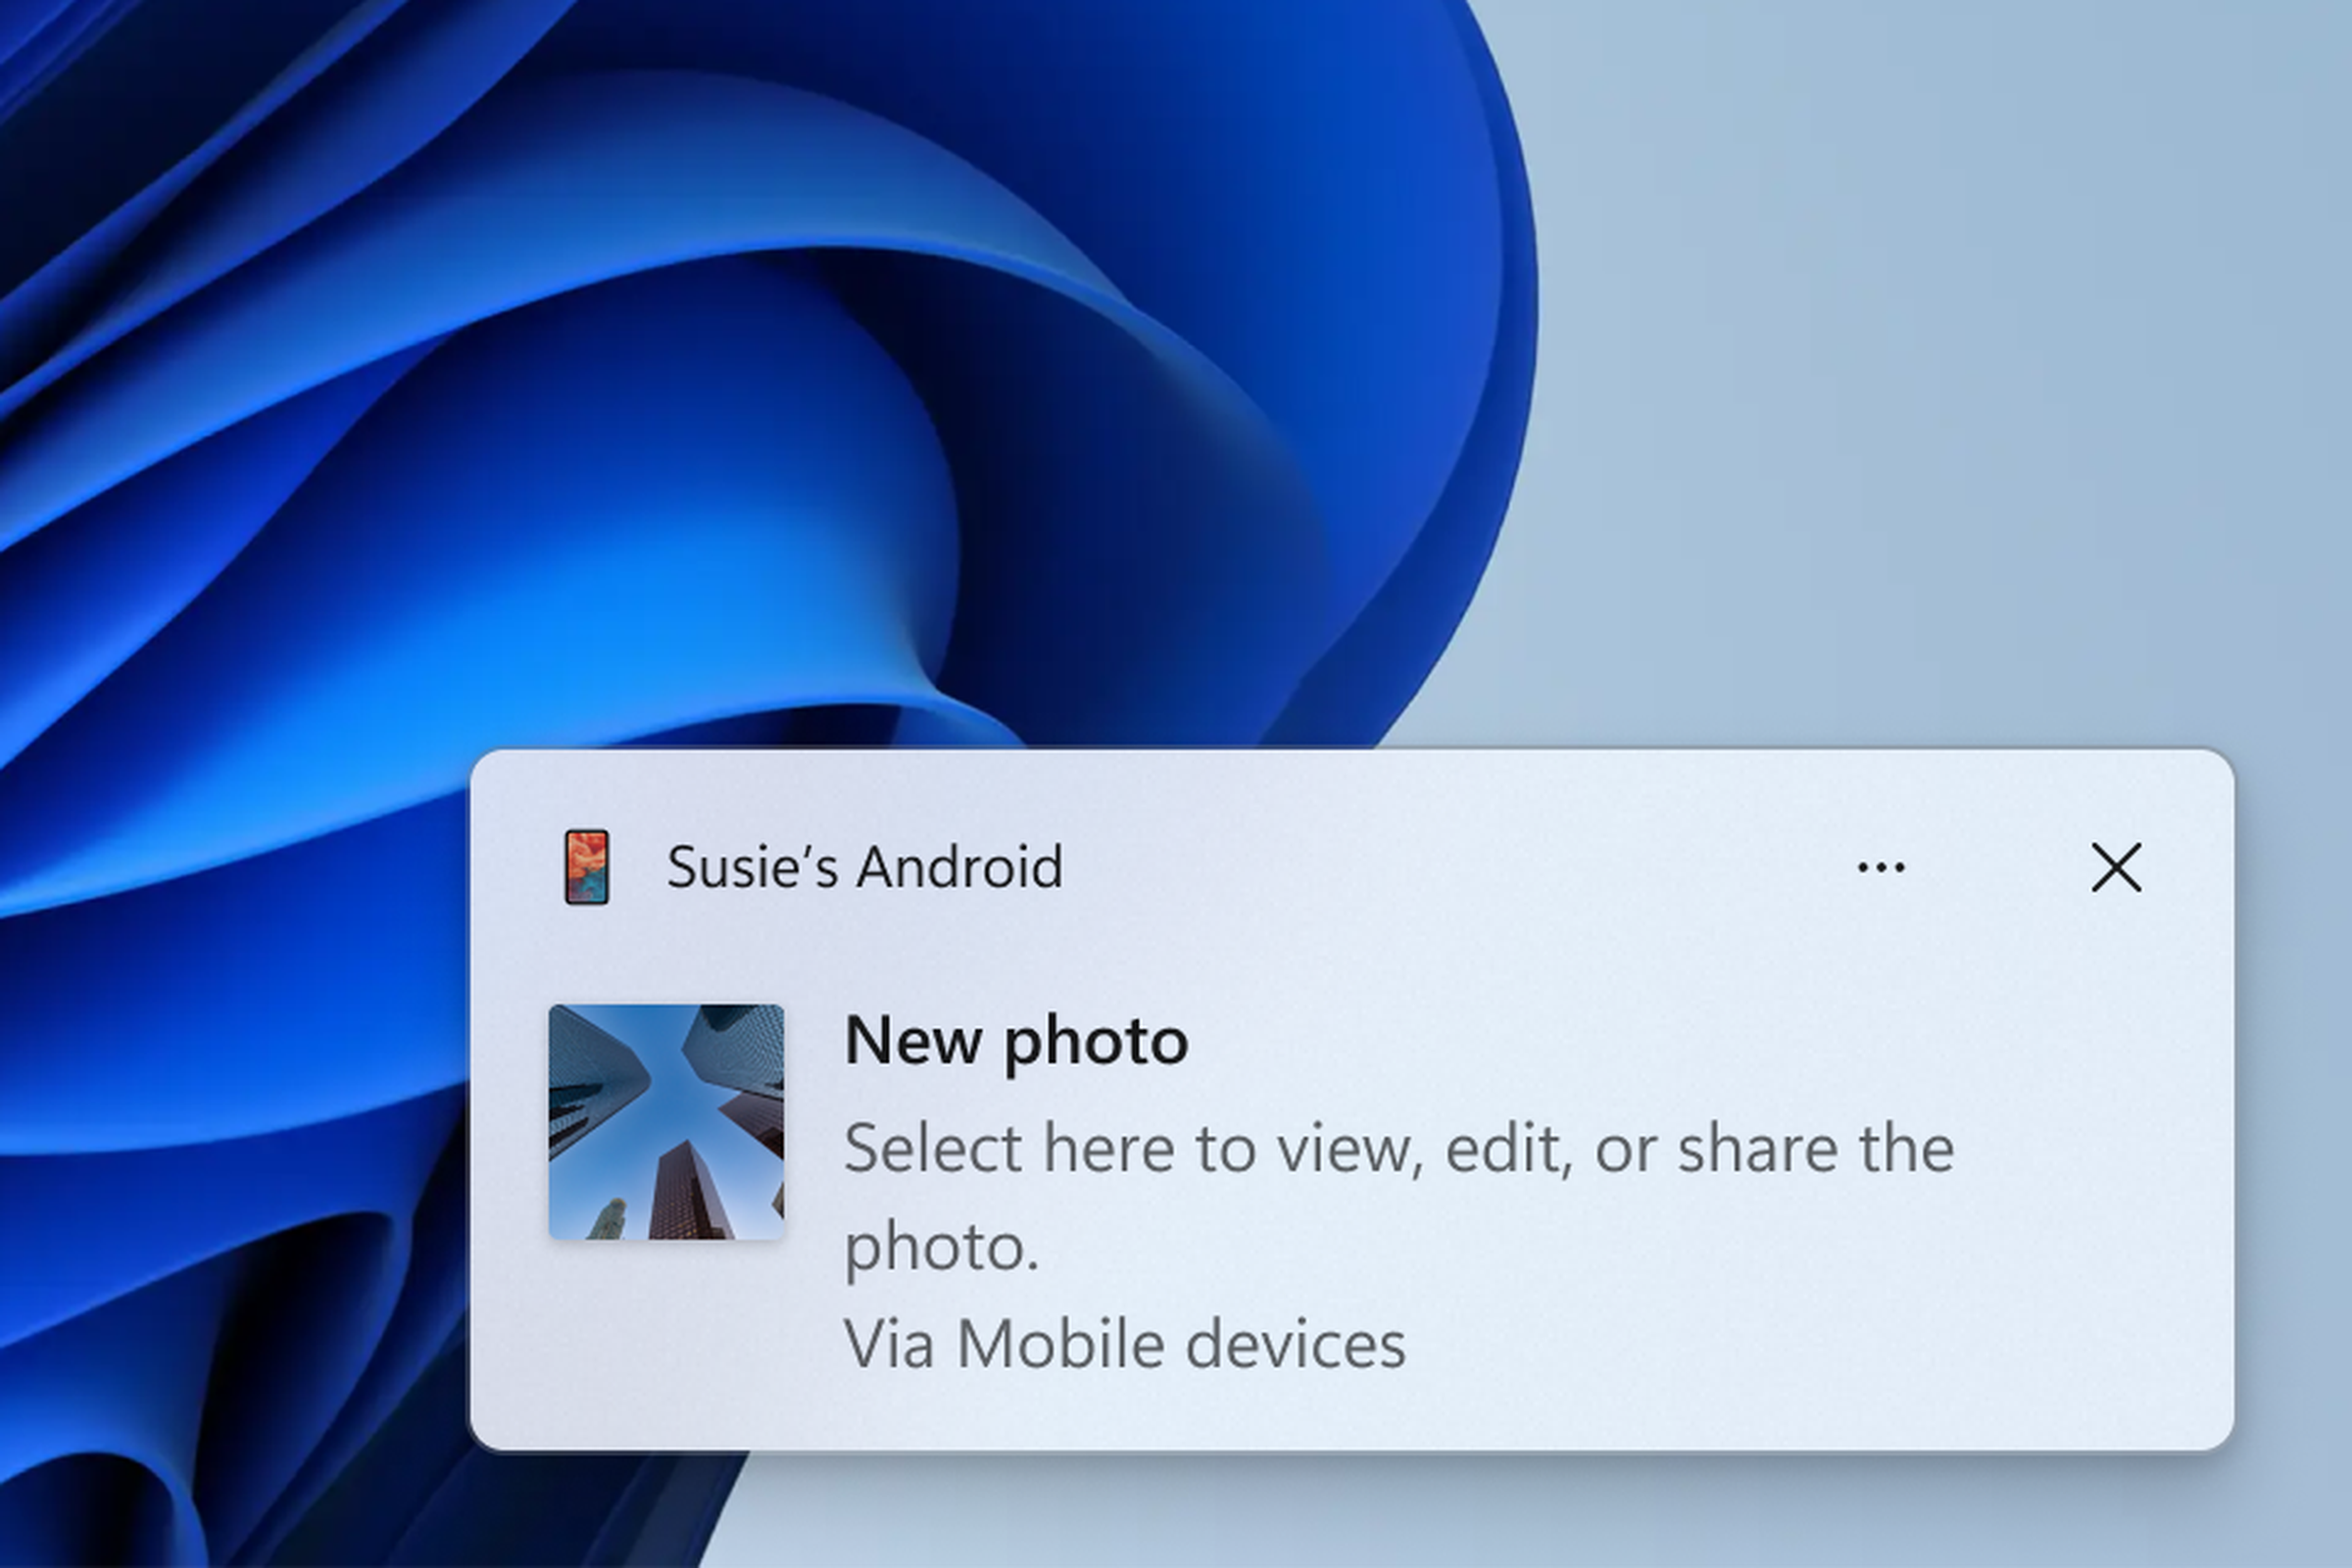 This new feature will make it easier to get photos from your Android device.